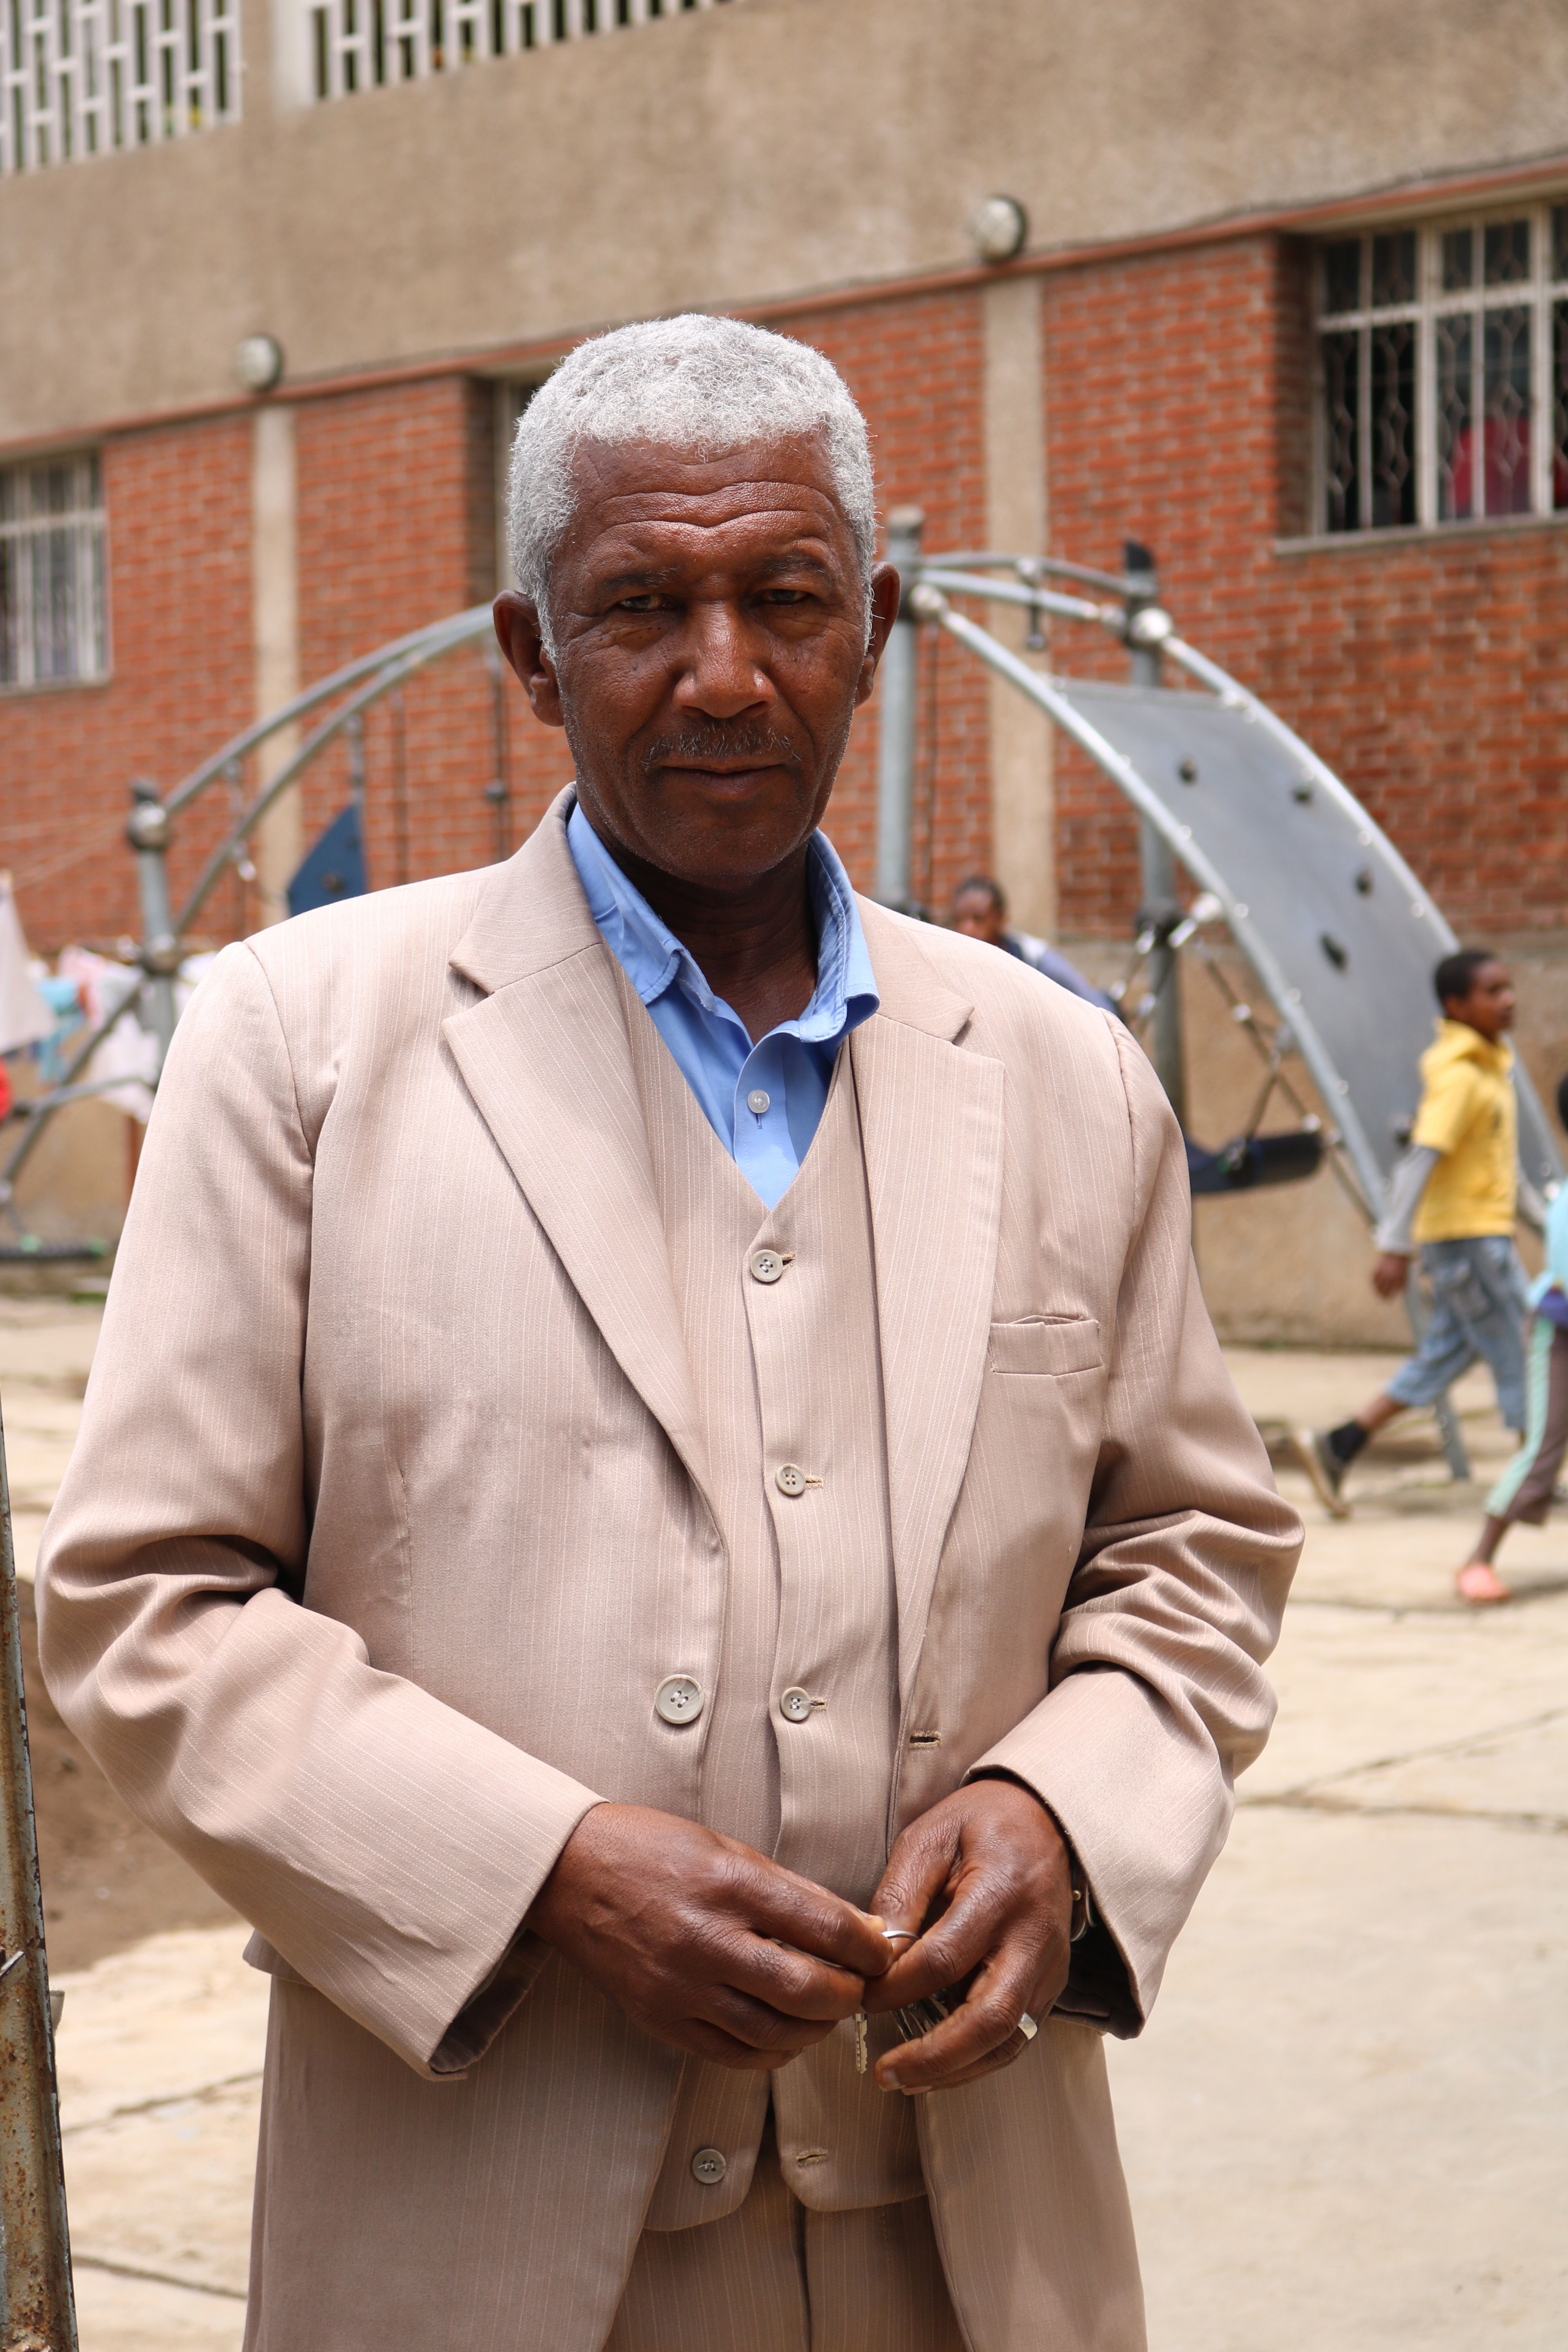 The director of Kidana Mehert Children's Home, Ato Assefa Kfile, poses for a picture in front of the playground located in Addis Ababa. Ato Assefa Kfile has worked closely with Sister Lutgarda to run the orphanage after he took over in 1996. There are about 50 children ranging in age from newborn to 18. Photo by Abigail Bekele. Ethiopia, 2018.

